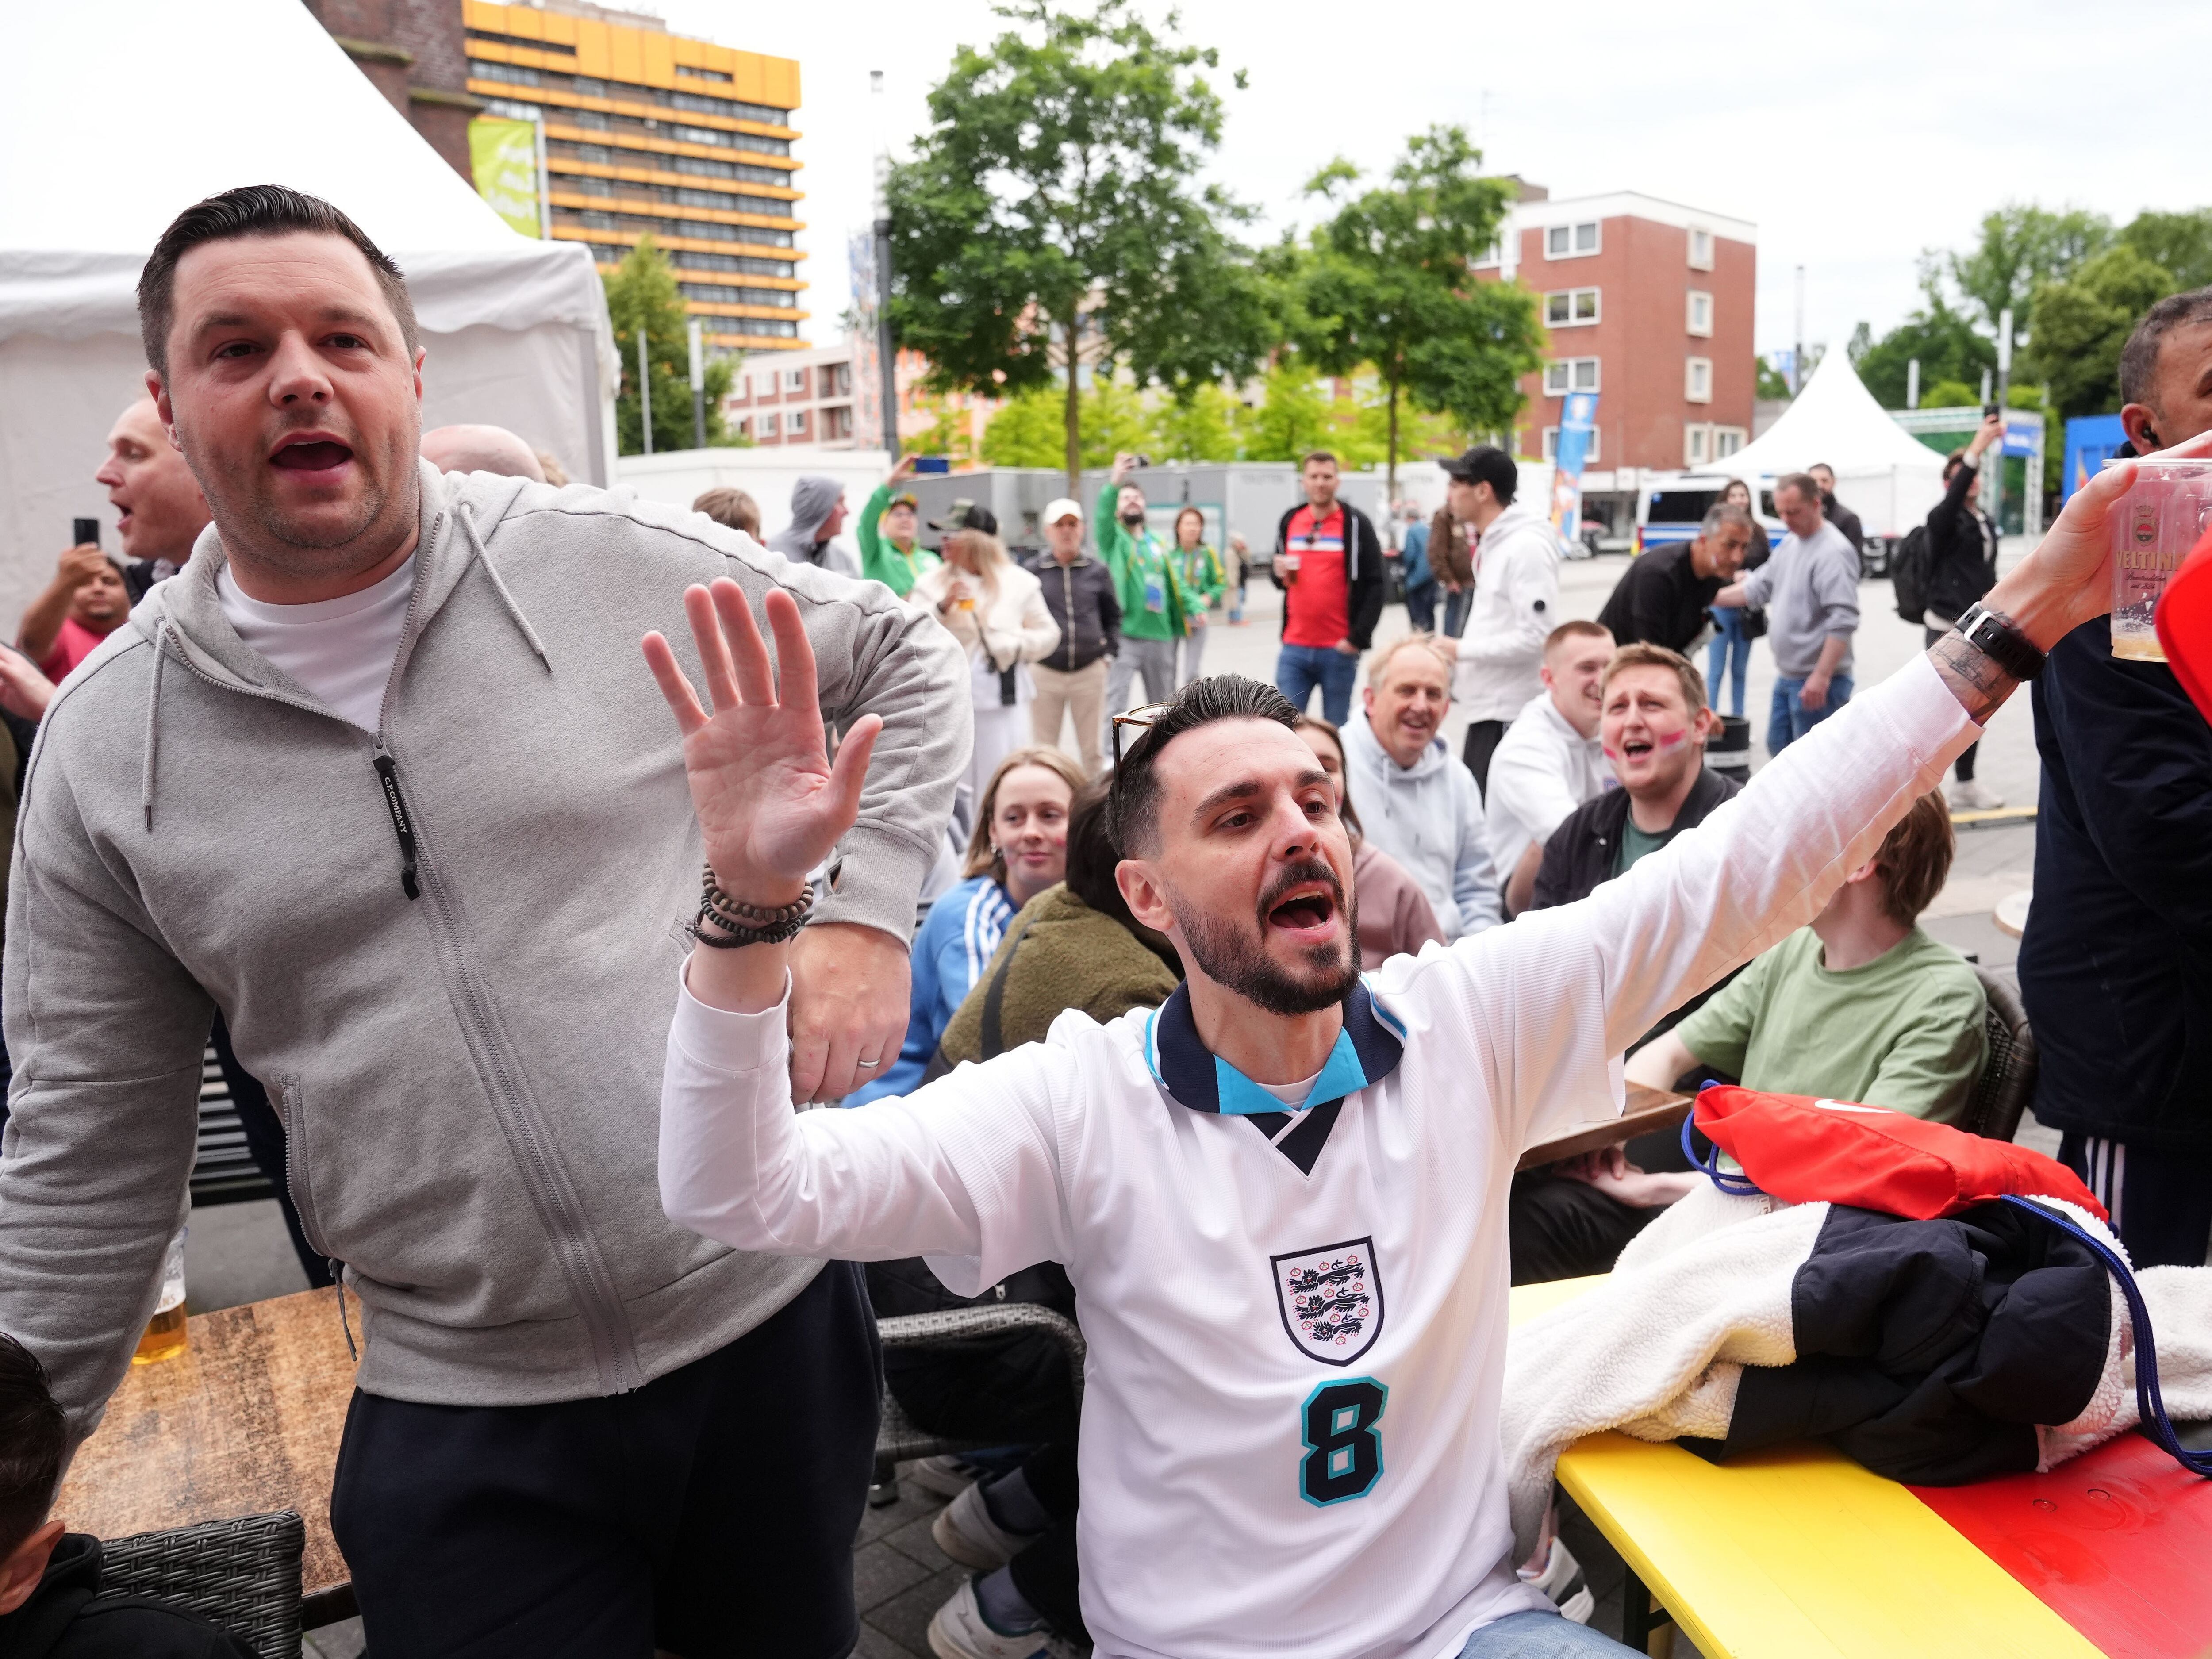 Gareth Southgate wants fans to ‘have a brilliant time’ despite security fears